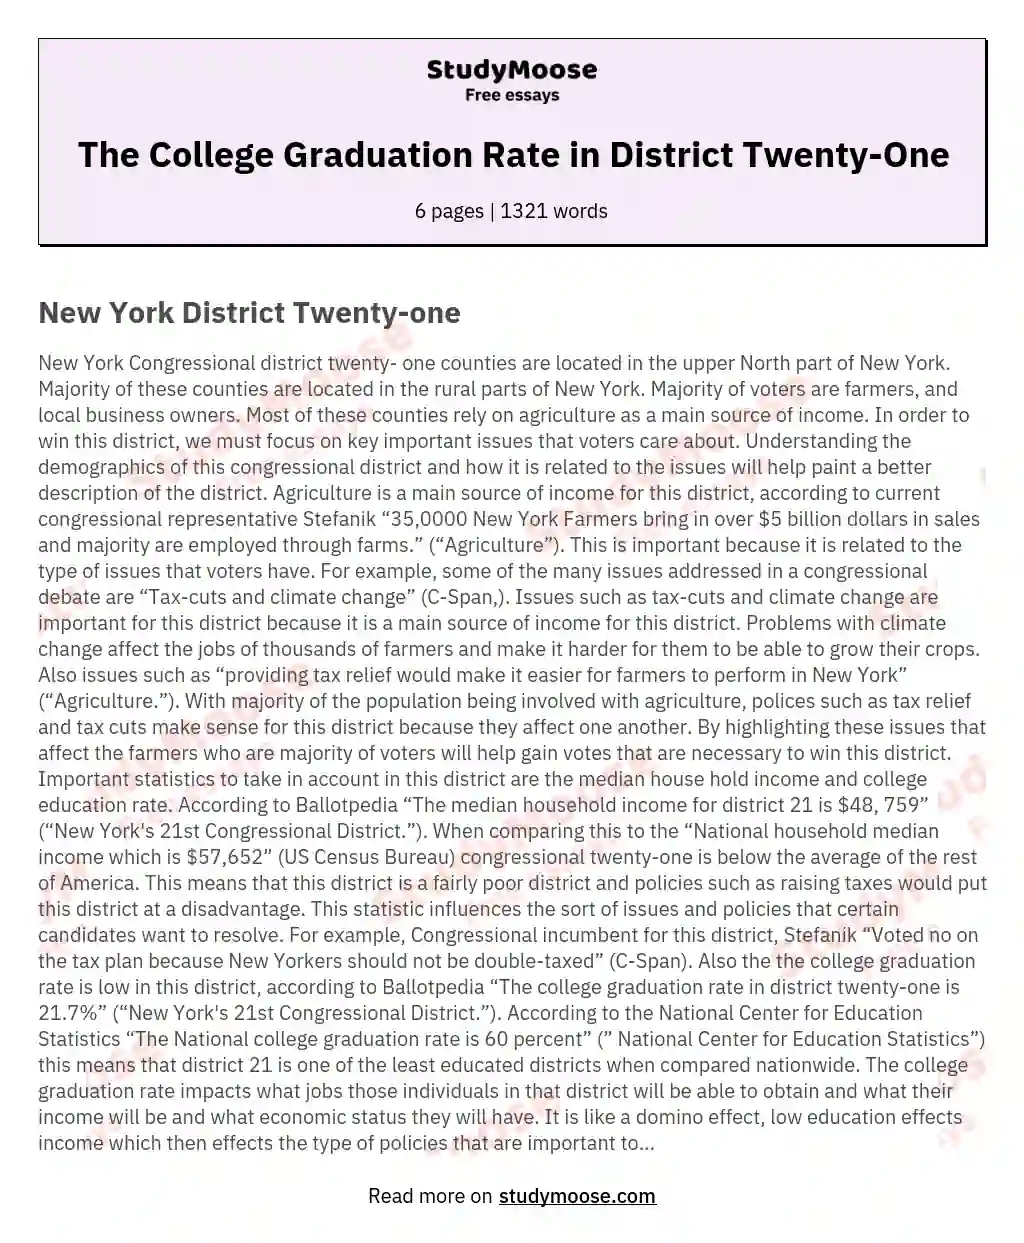 The College Graduation Rate in District Twenty-One essay